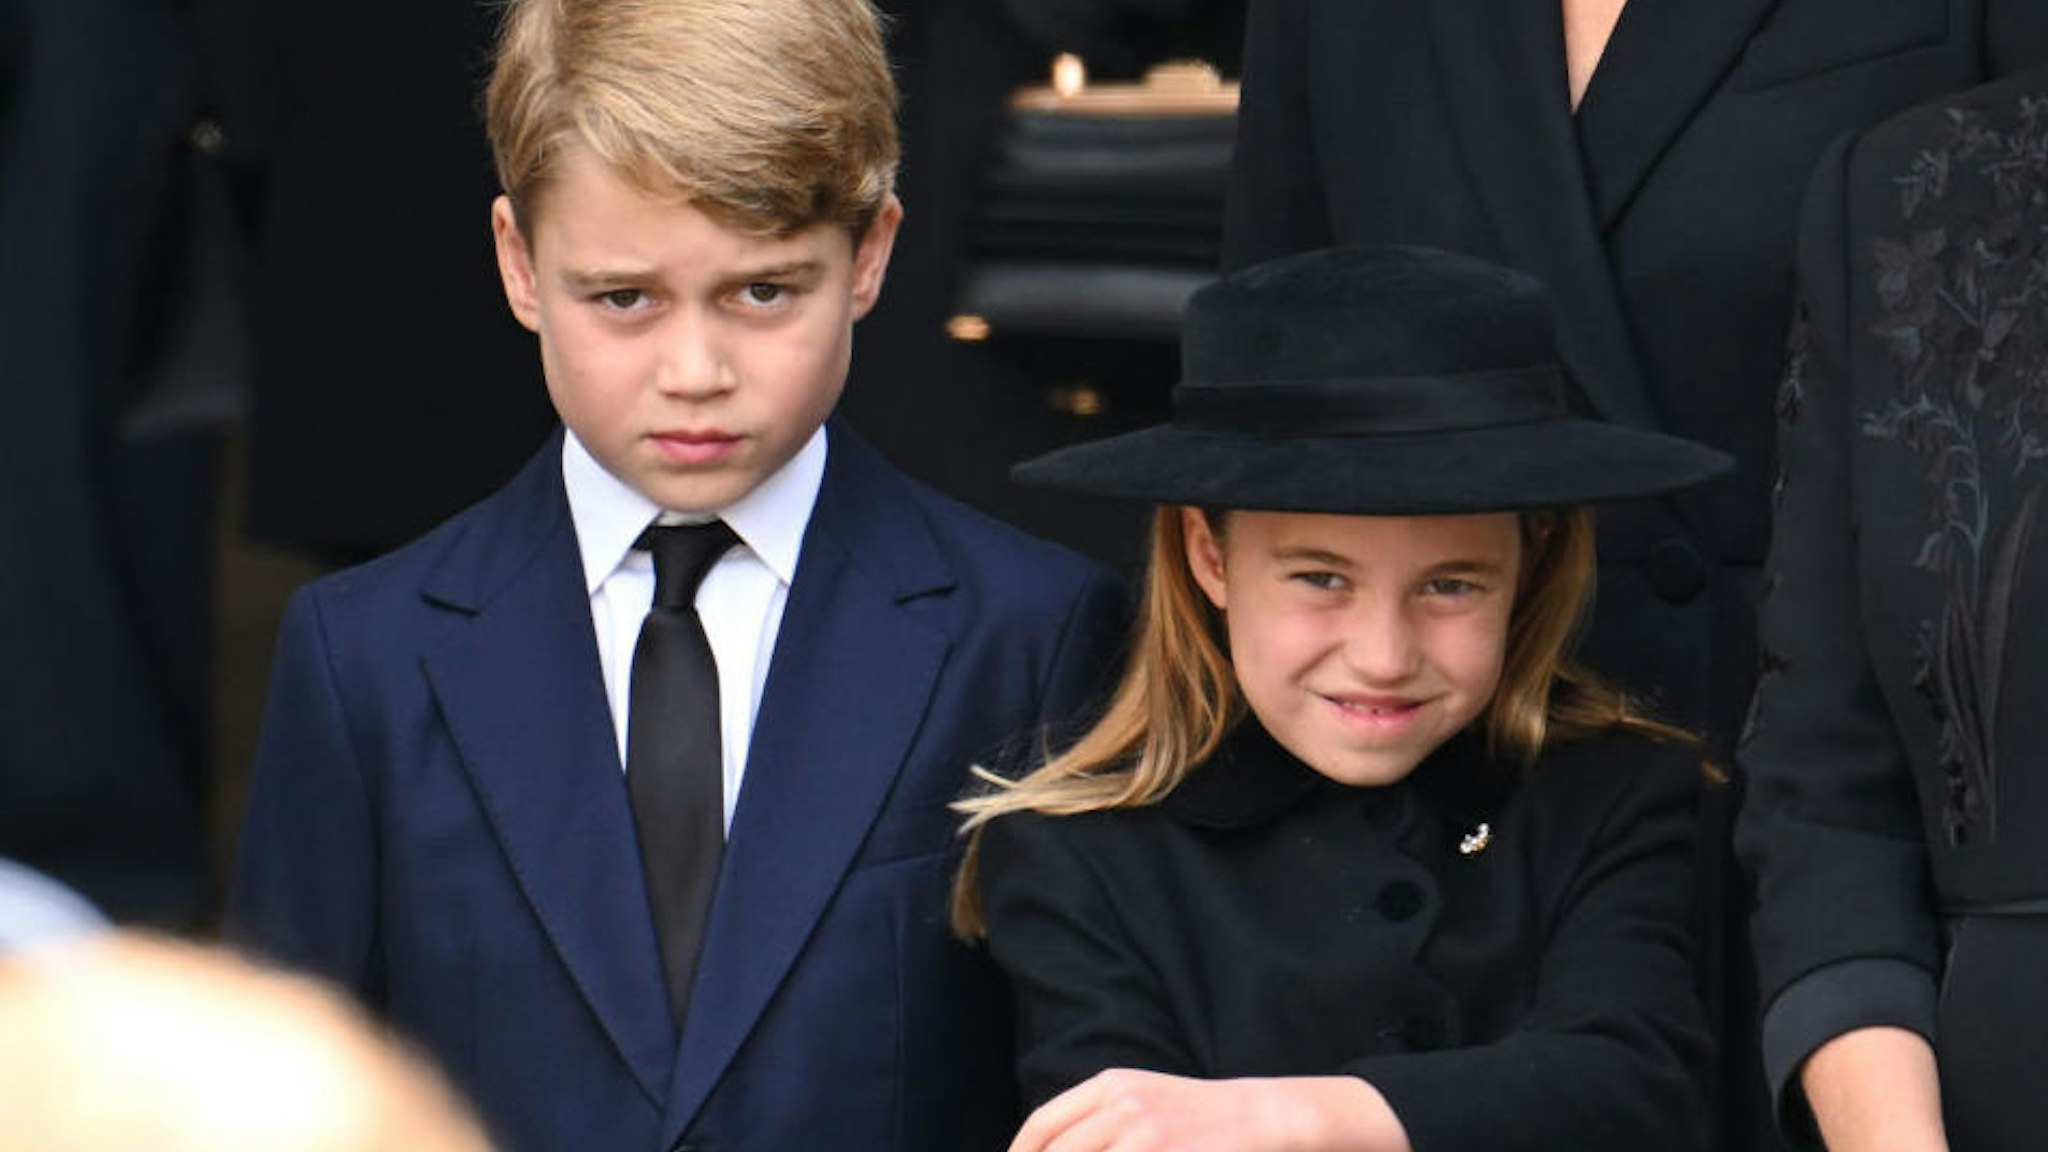 Prince George of Wales and Princess Charlotte of Wales during the State Funeral of Queen Elizabeth II at Westminster Abbey on September 19, 2022 in London, England.